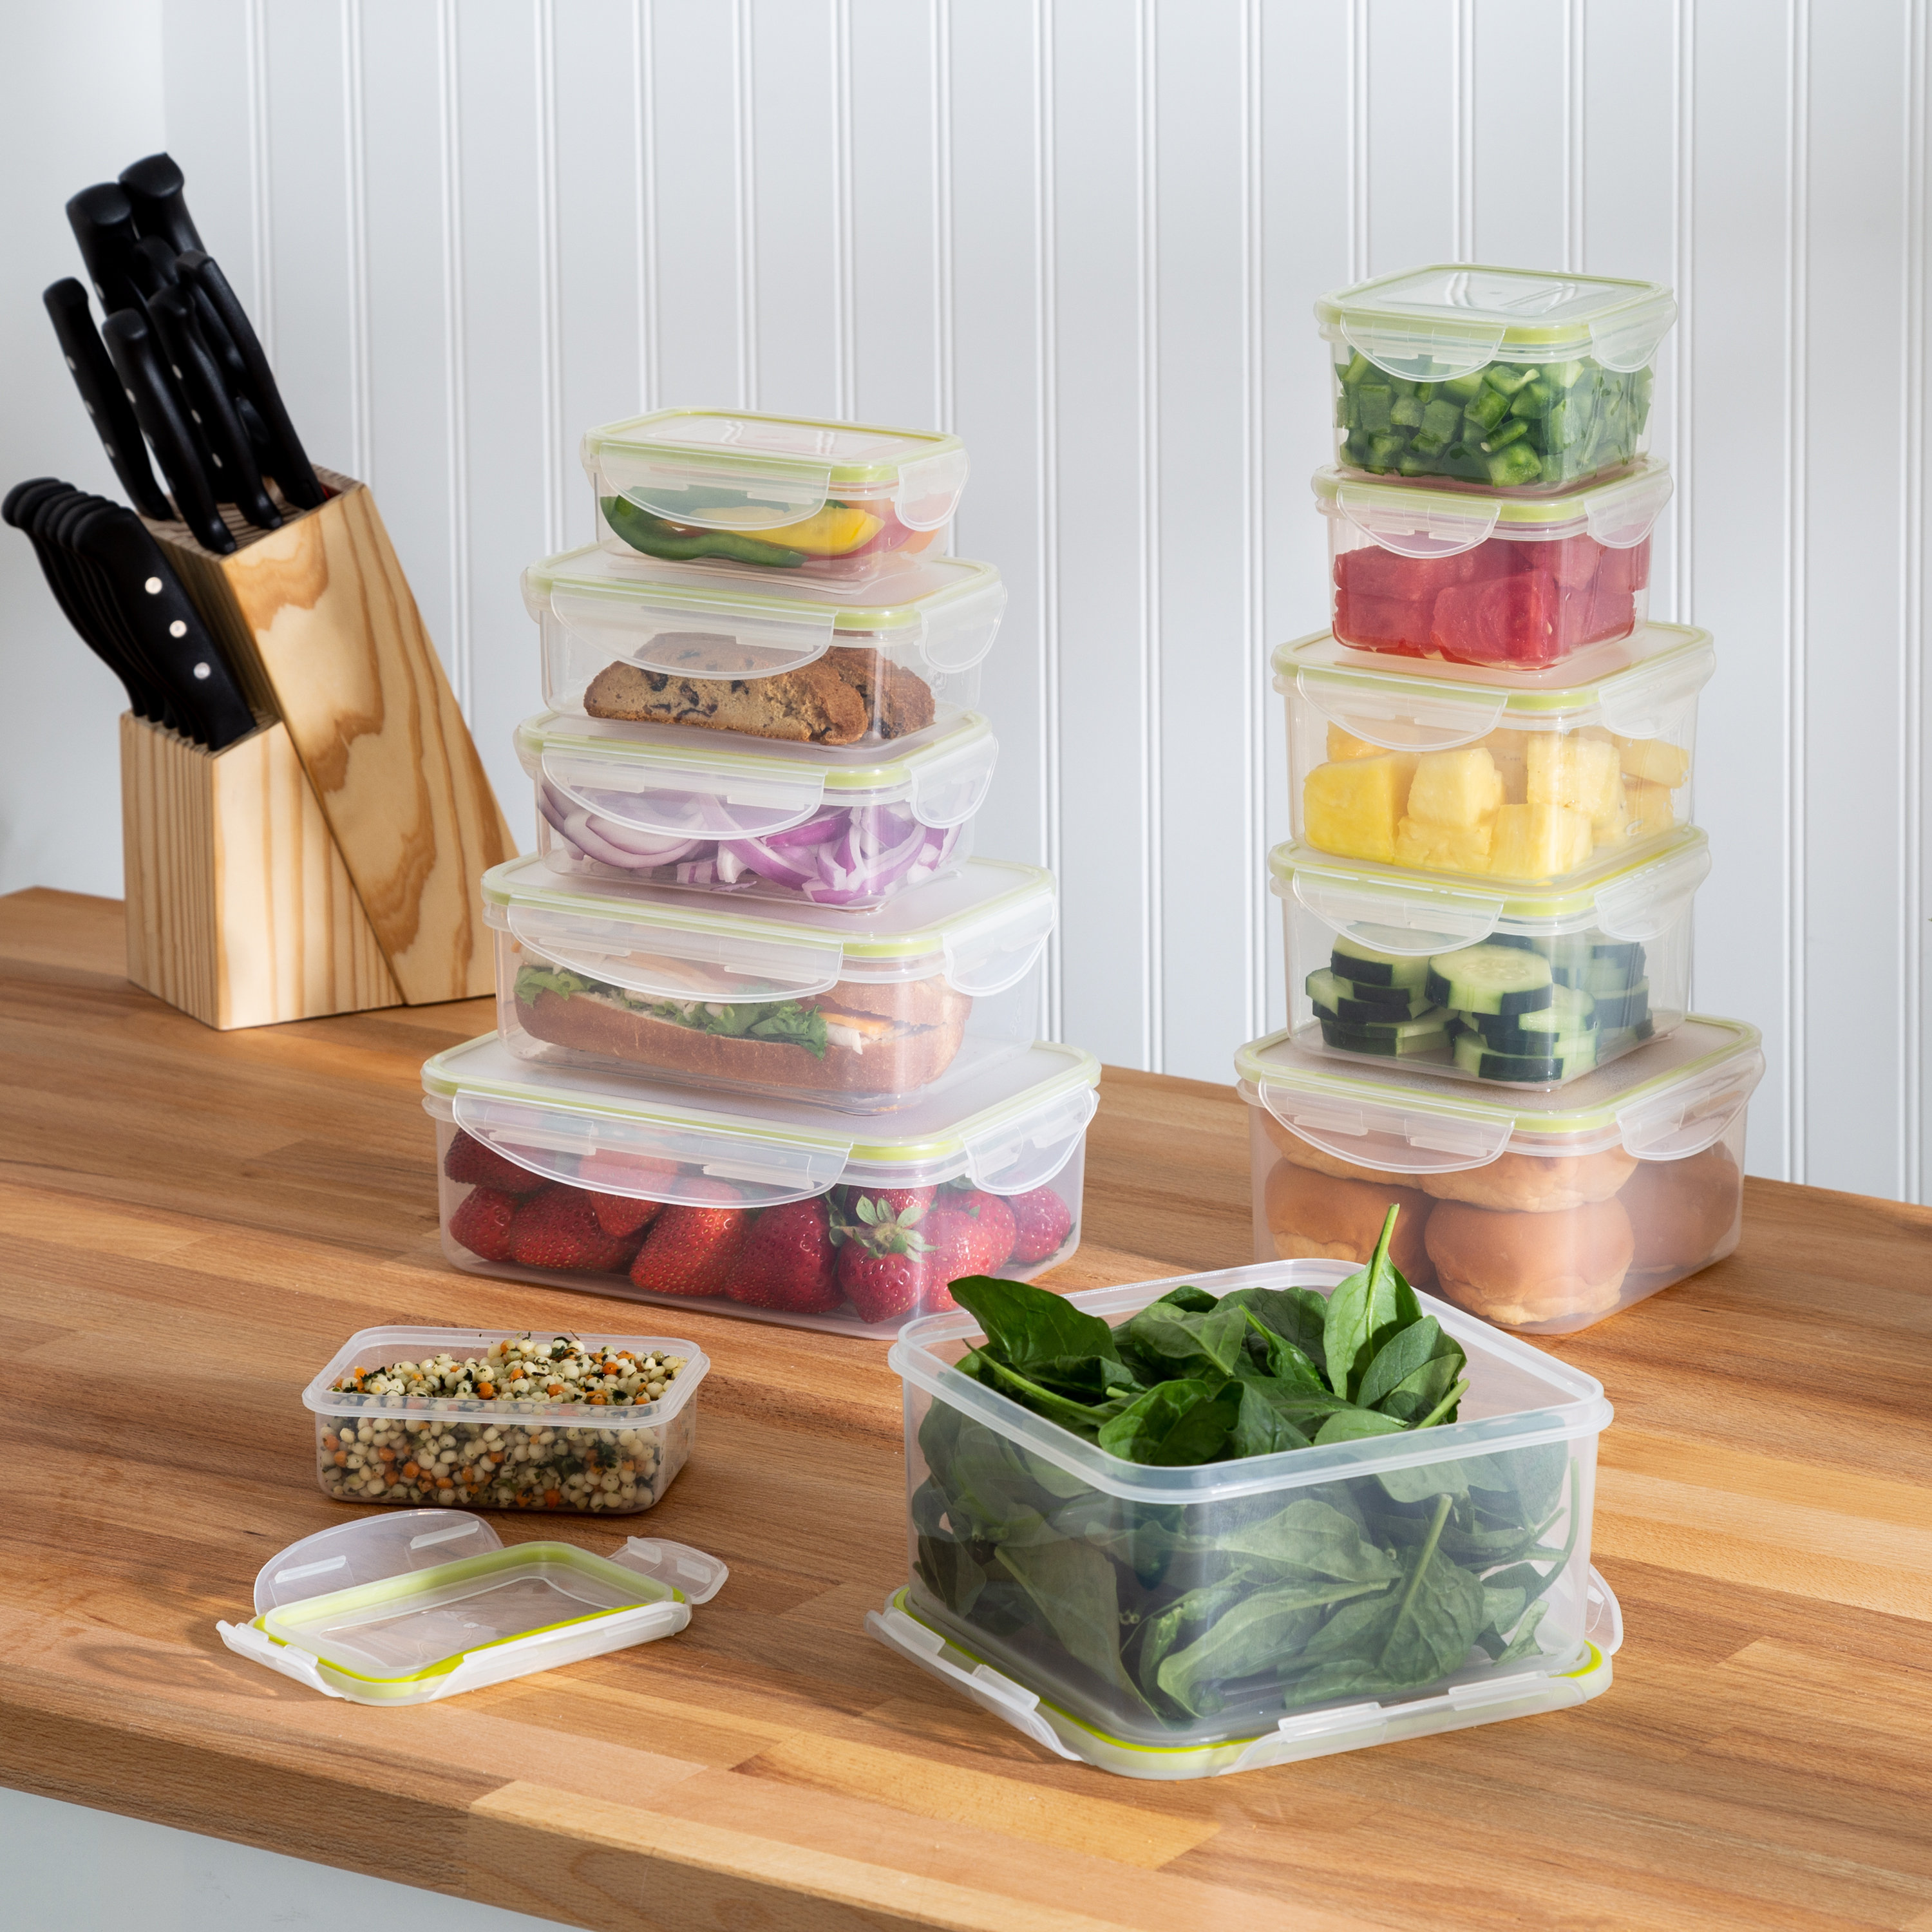 Save on Snapware Airtight Leakproof Plastic Food Storage Order Online  Delivery